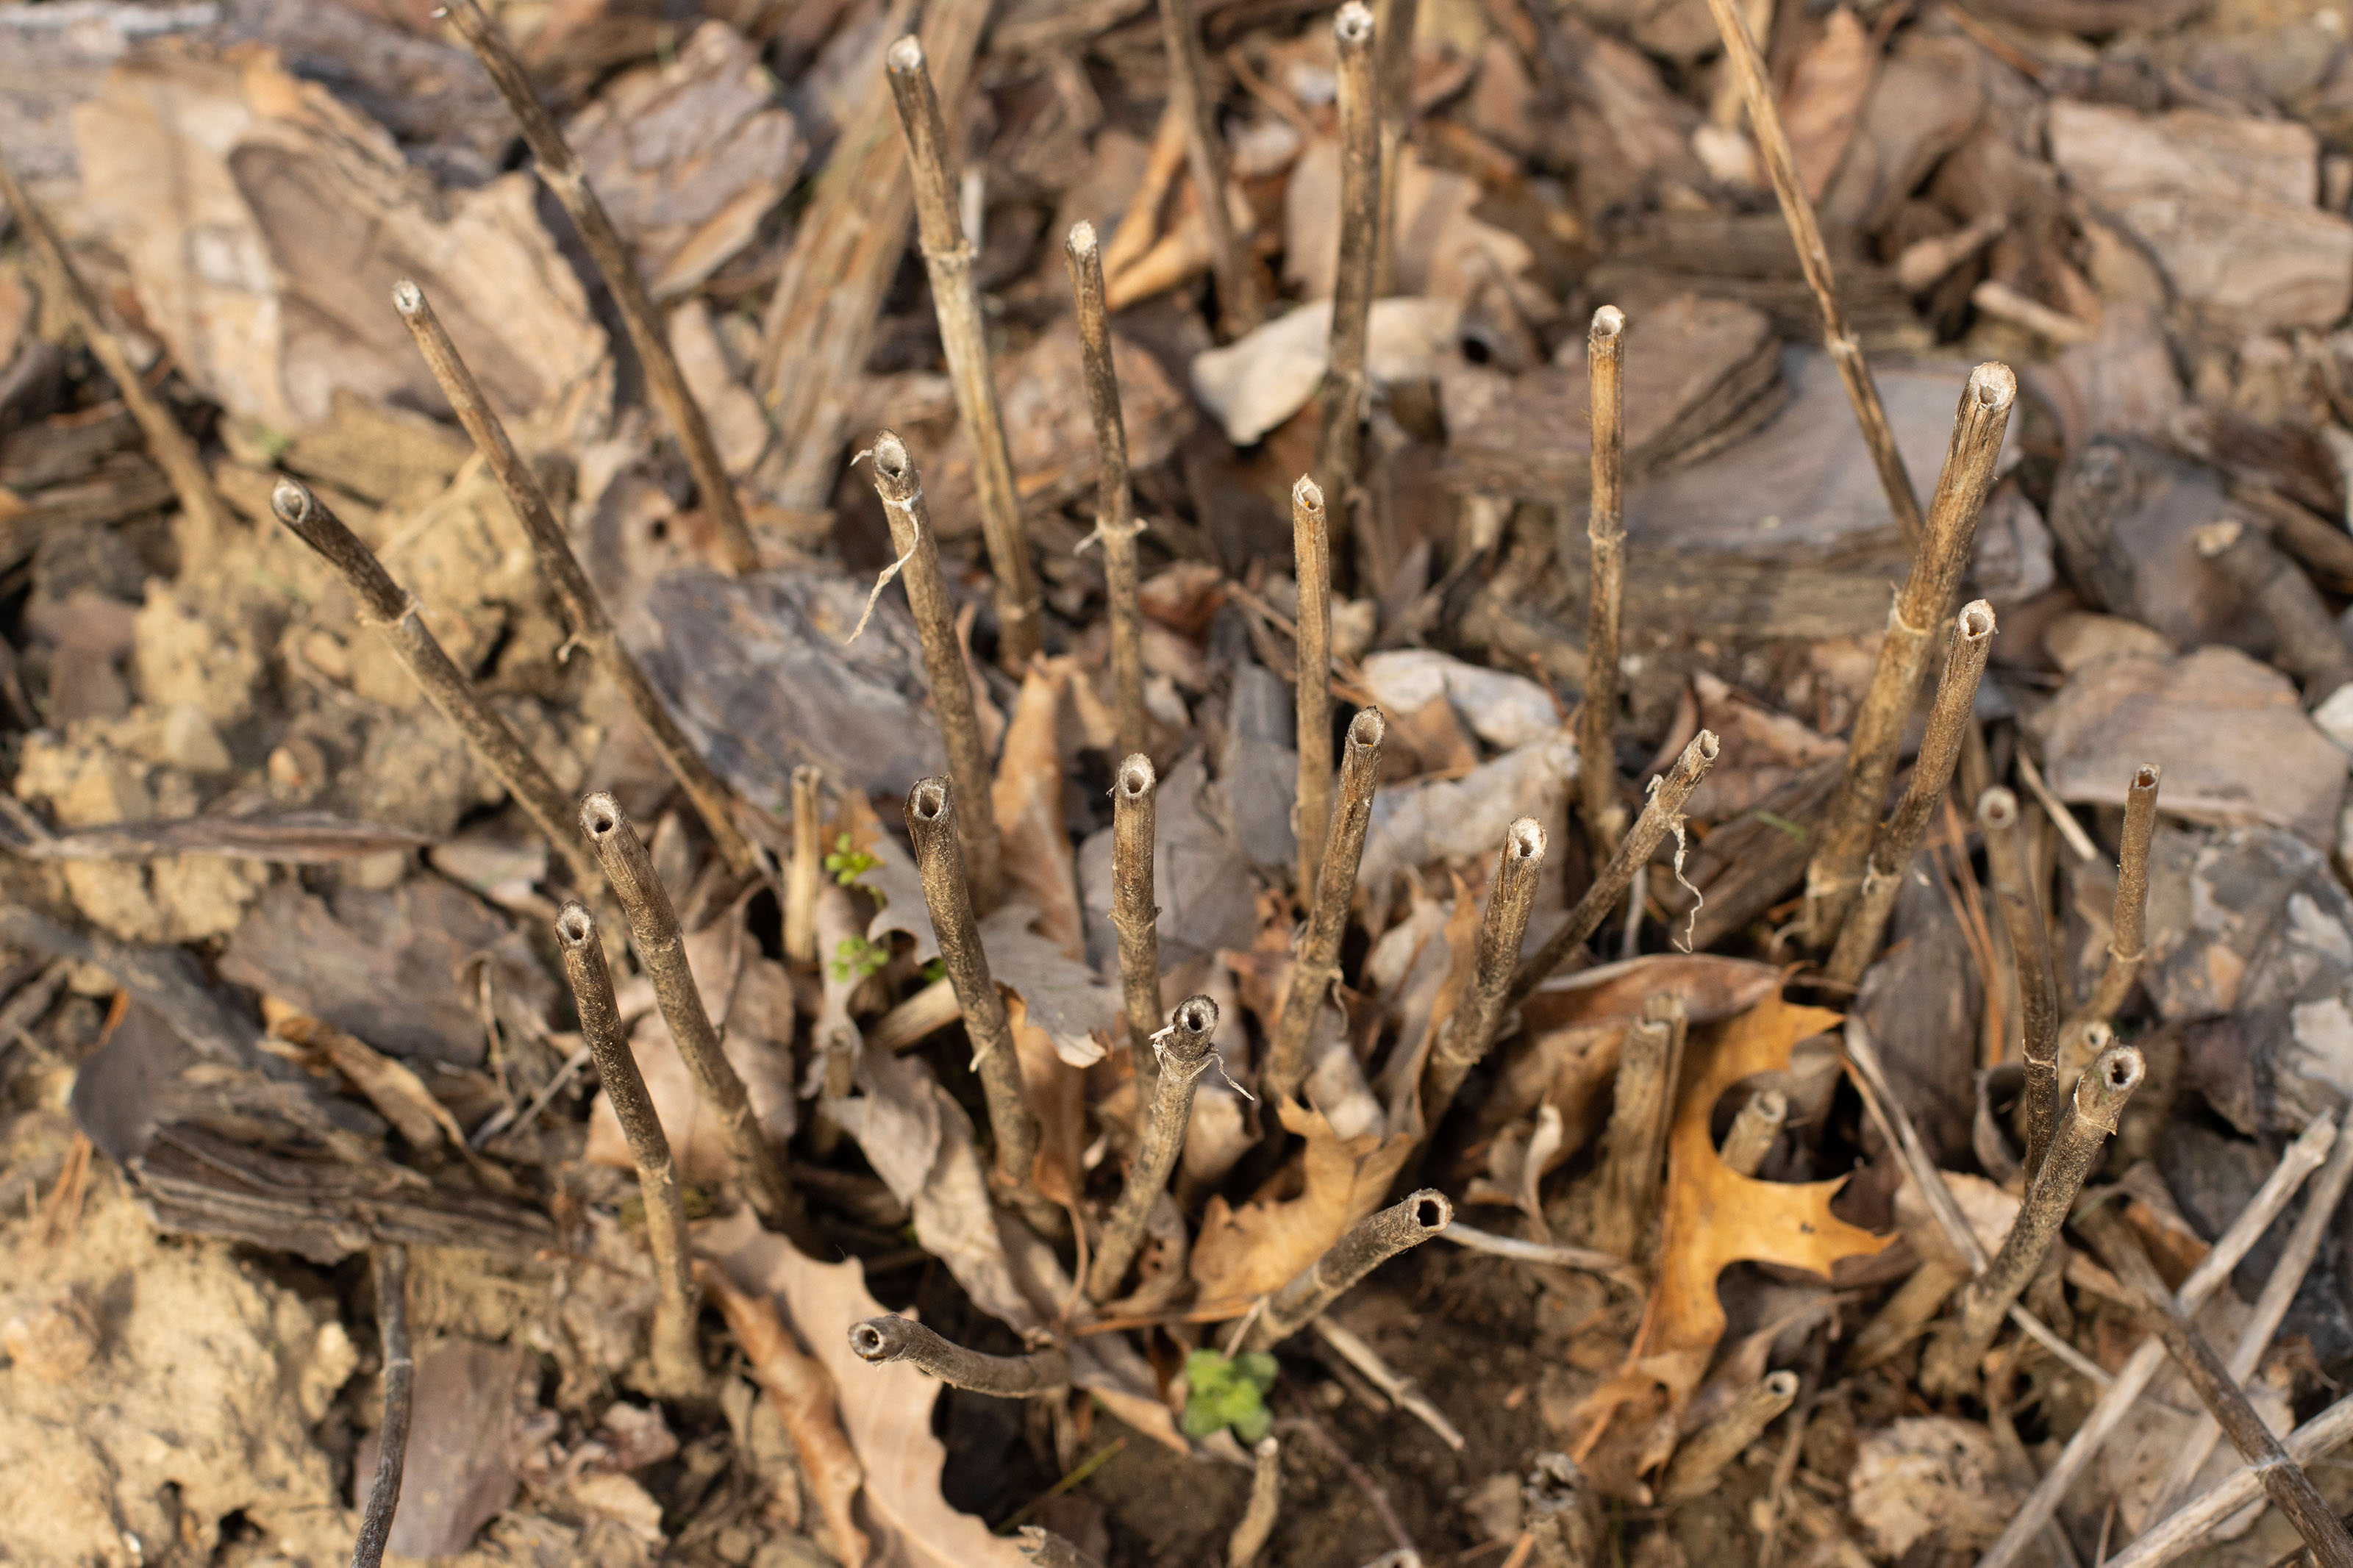 Cut stems left to overwinter in a leafy garden bed.